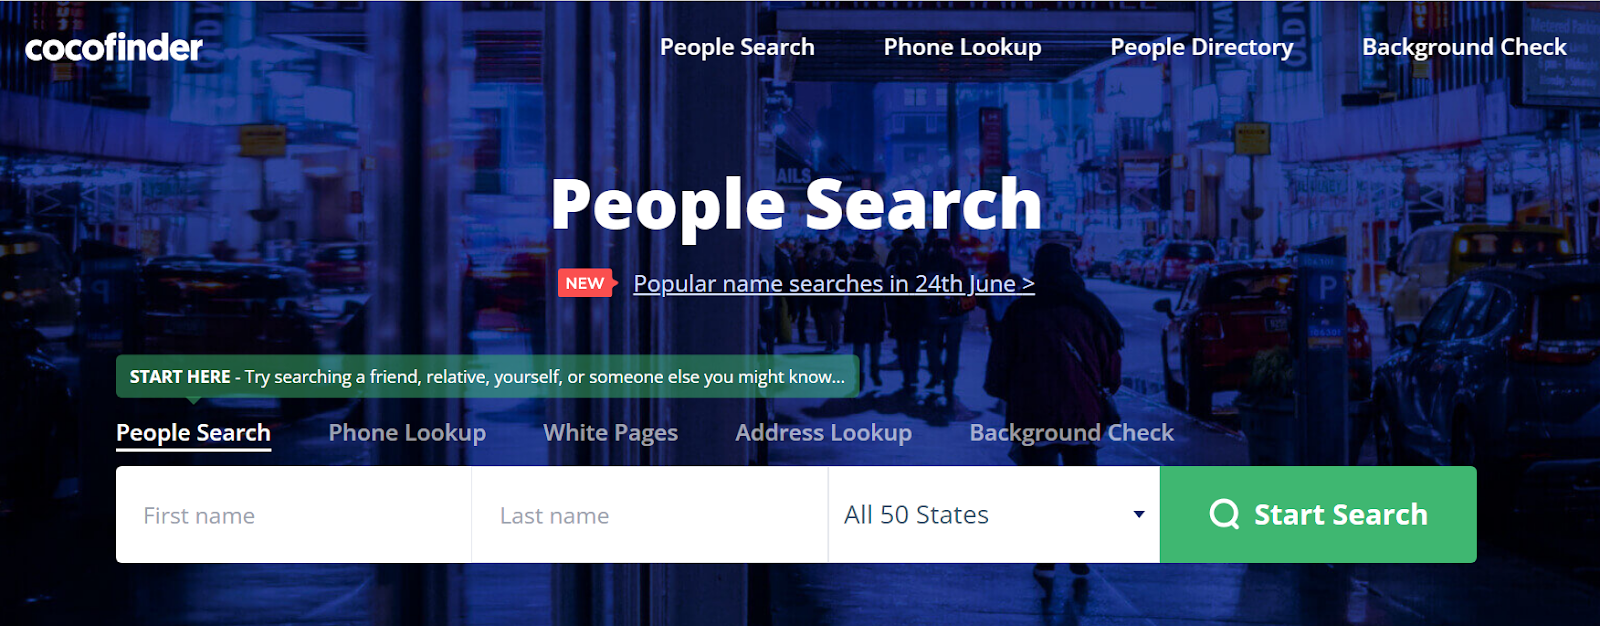 10 Best Tools to Search for Real People Online: Find Anyone, Anywhere